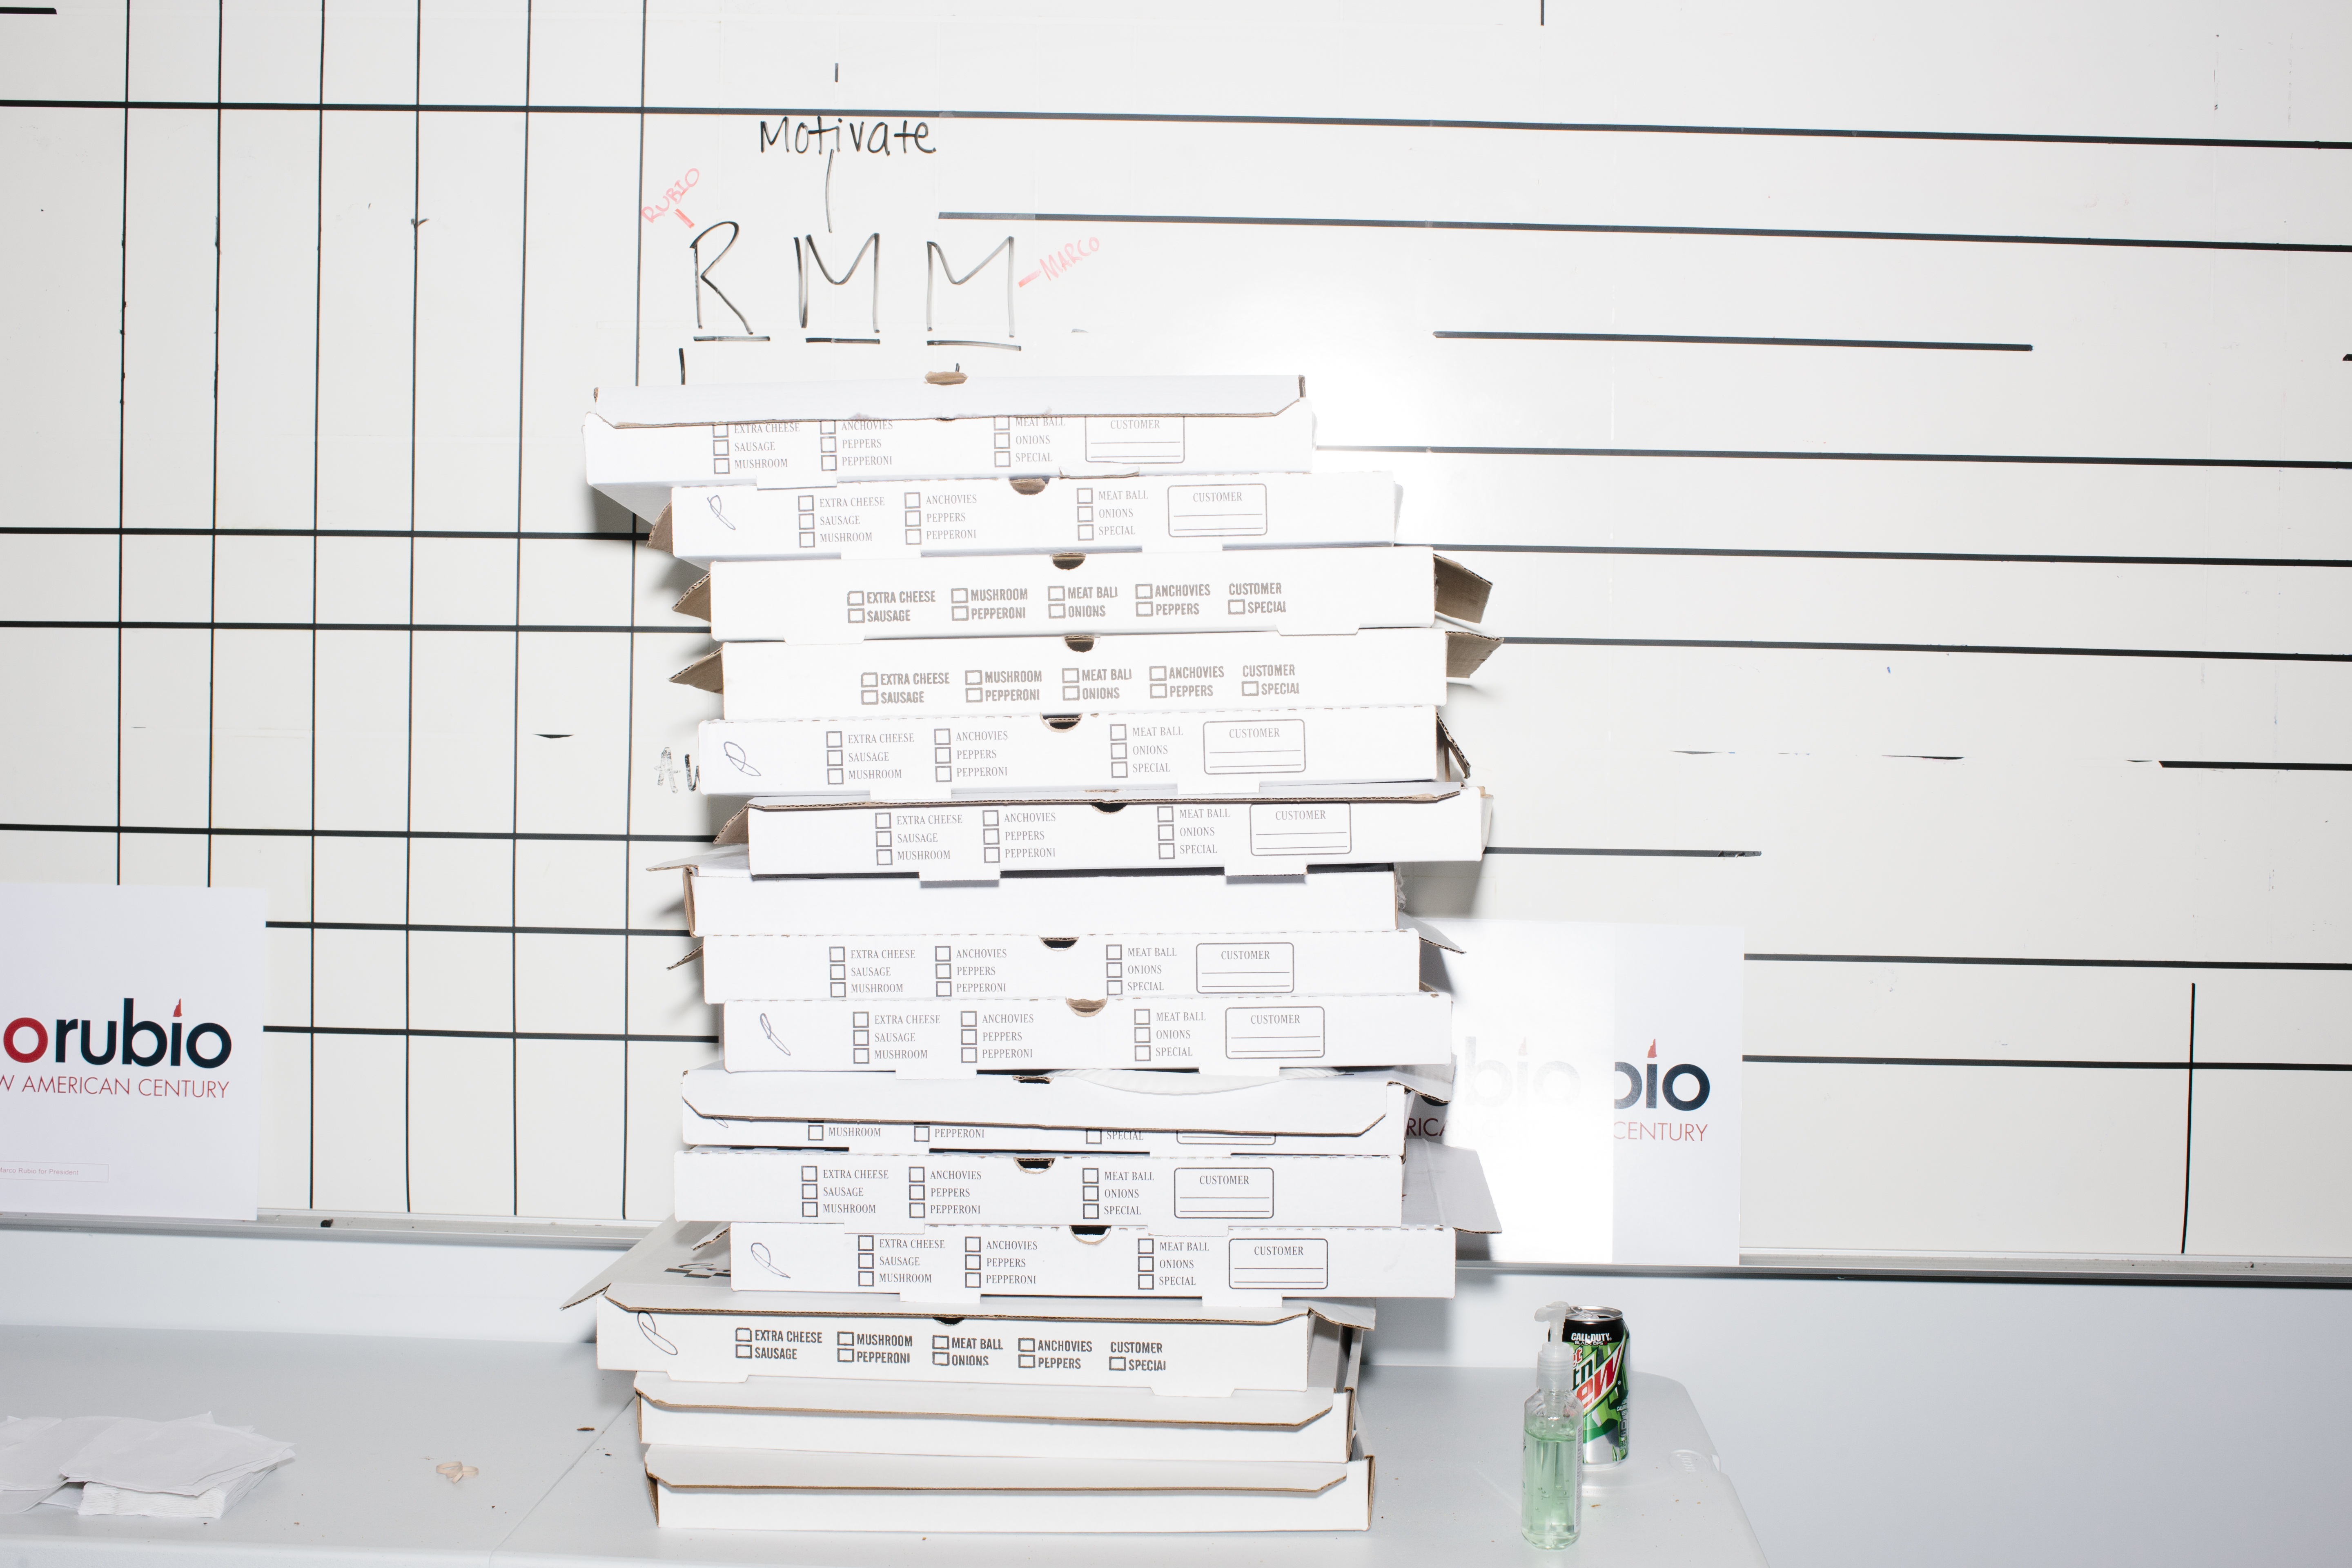 Pizza boxes are stacked in the campaign headquarters of Republican presidential candidate, Florida Sen. Marco Rubio in Manchester, N.H. on Feb. 9.